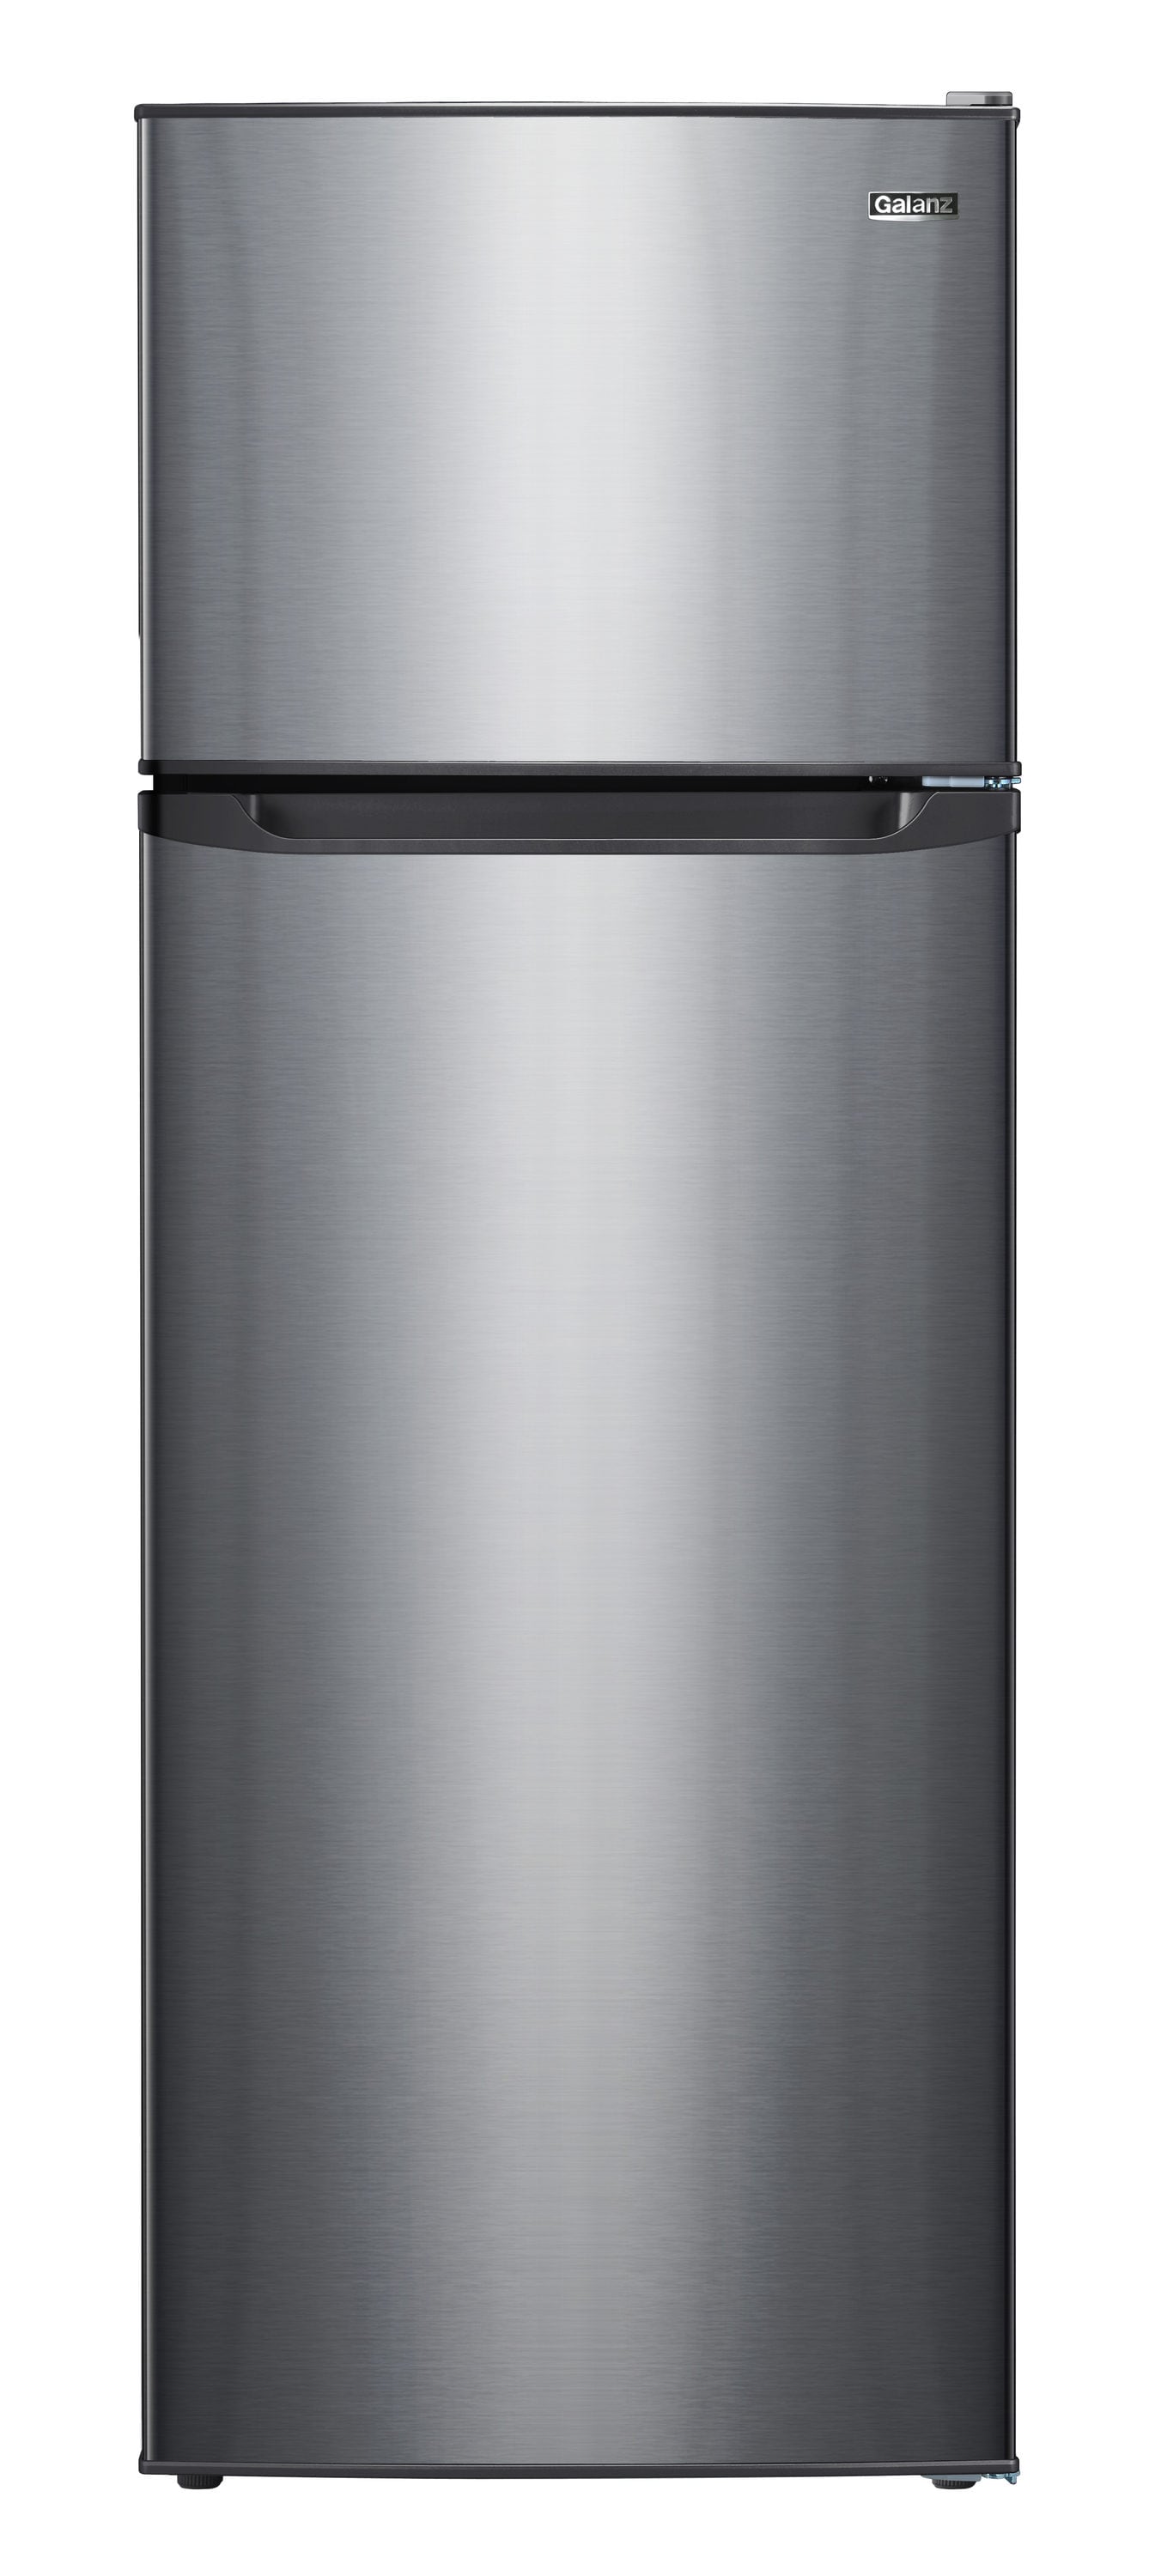 Galanz Refrigerator 12-cu ft Counter-depth Top-Freezer Refrigerator with  Ice Maker (Stainless Steel Look) ENERGY STAR in the Top-Freezer  Refrigerators department at